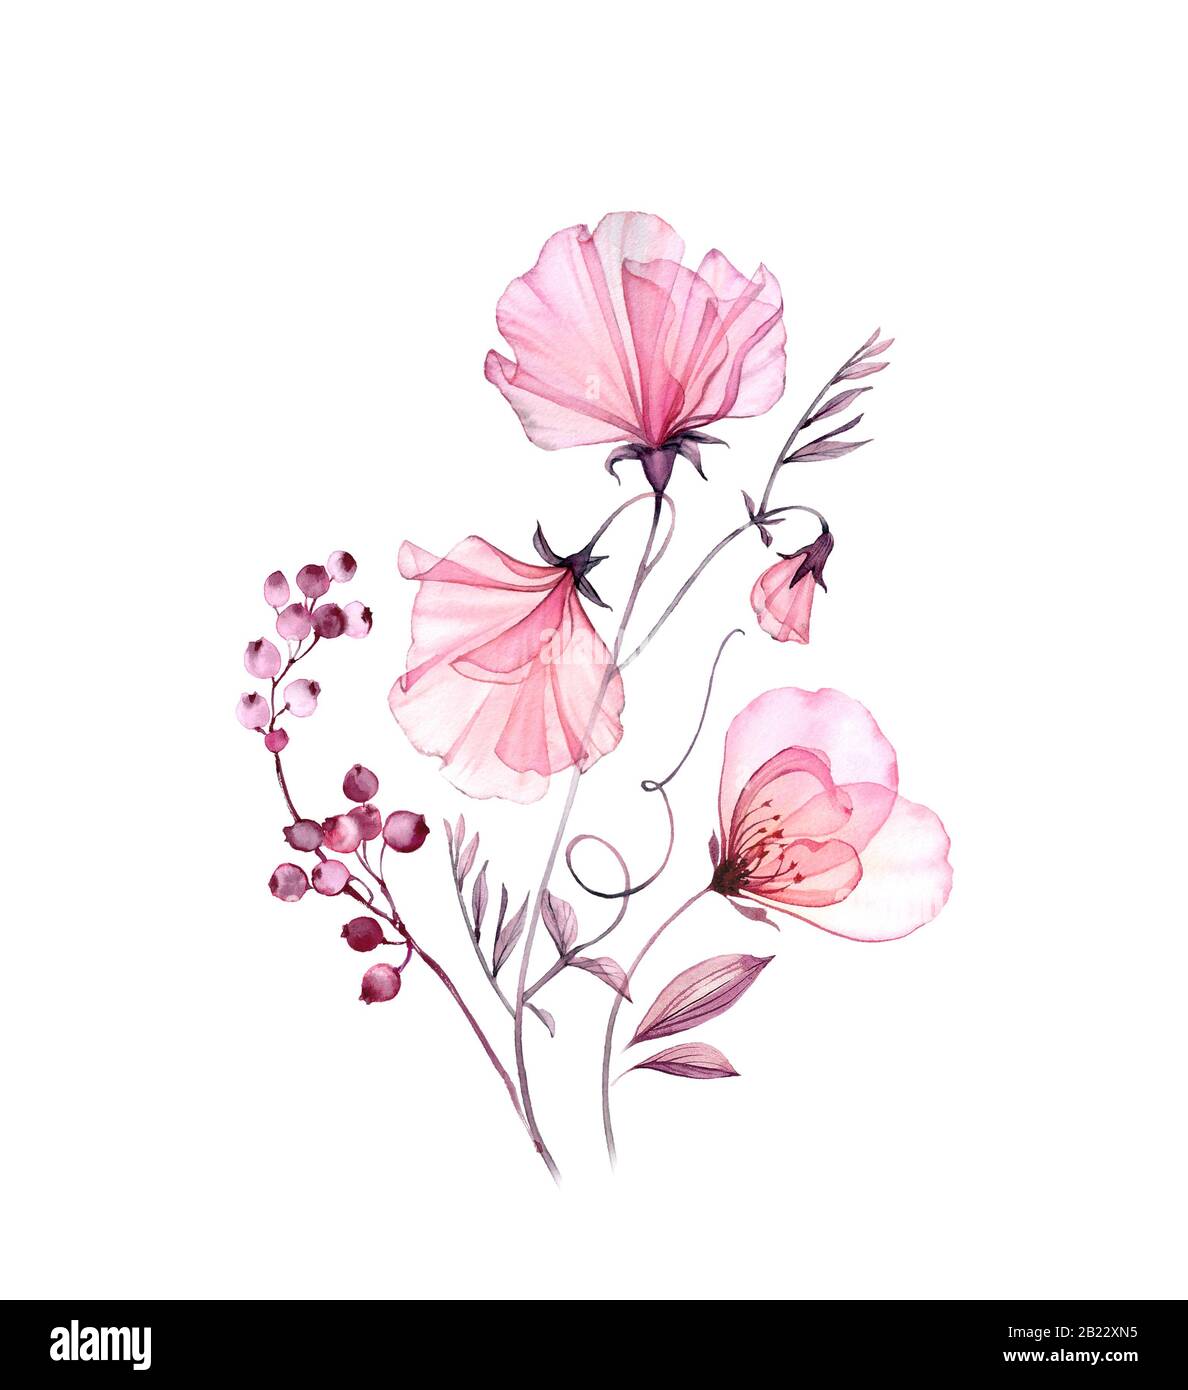 Watercolor floral composition. Transparent sweet pea bouquet with rose and berries. Artwork isolated on white. Botanical hand painted illustration for Stock Photo